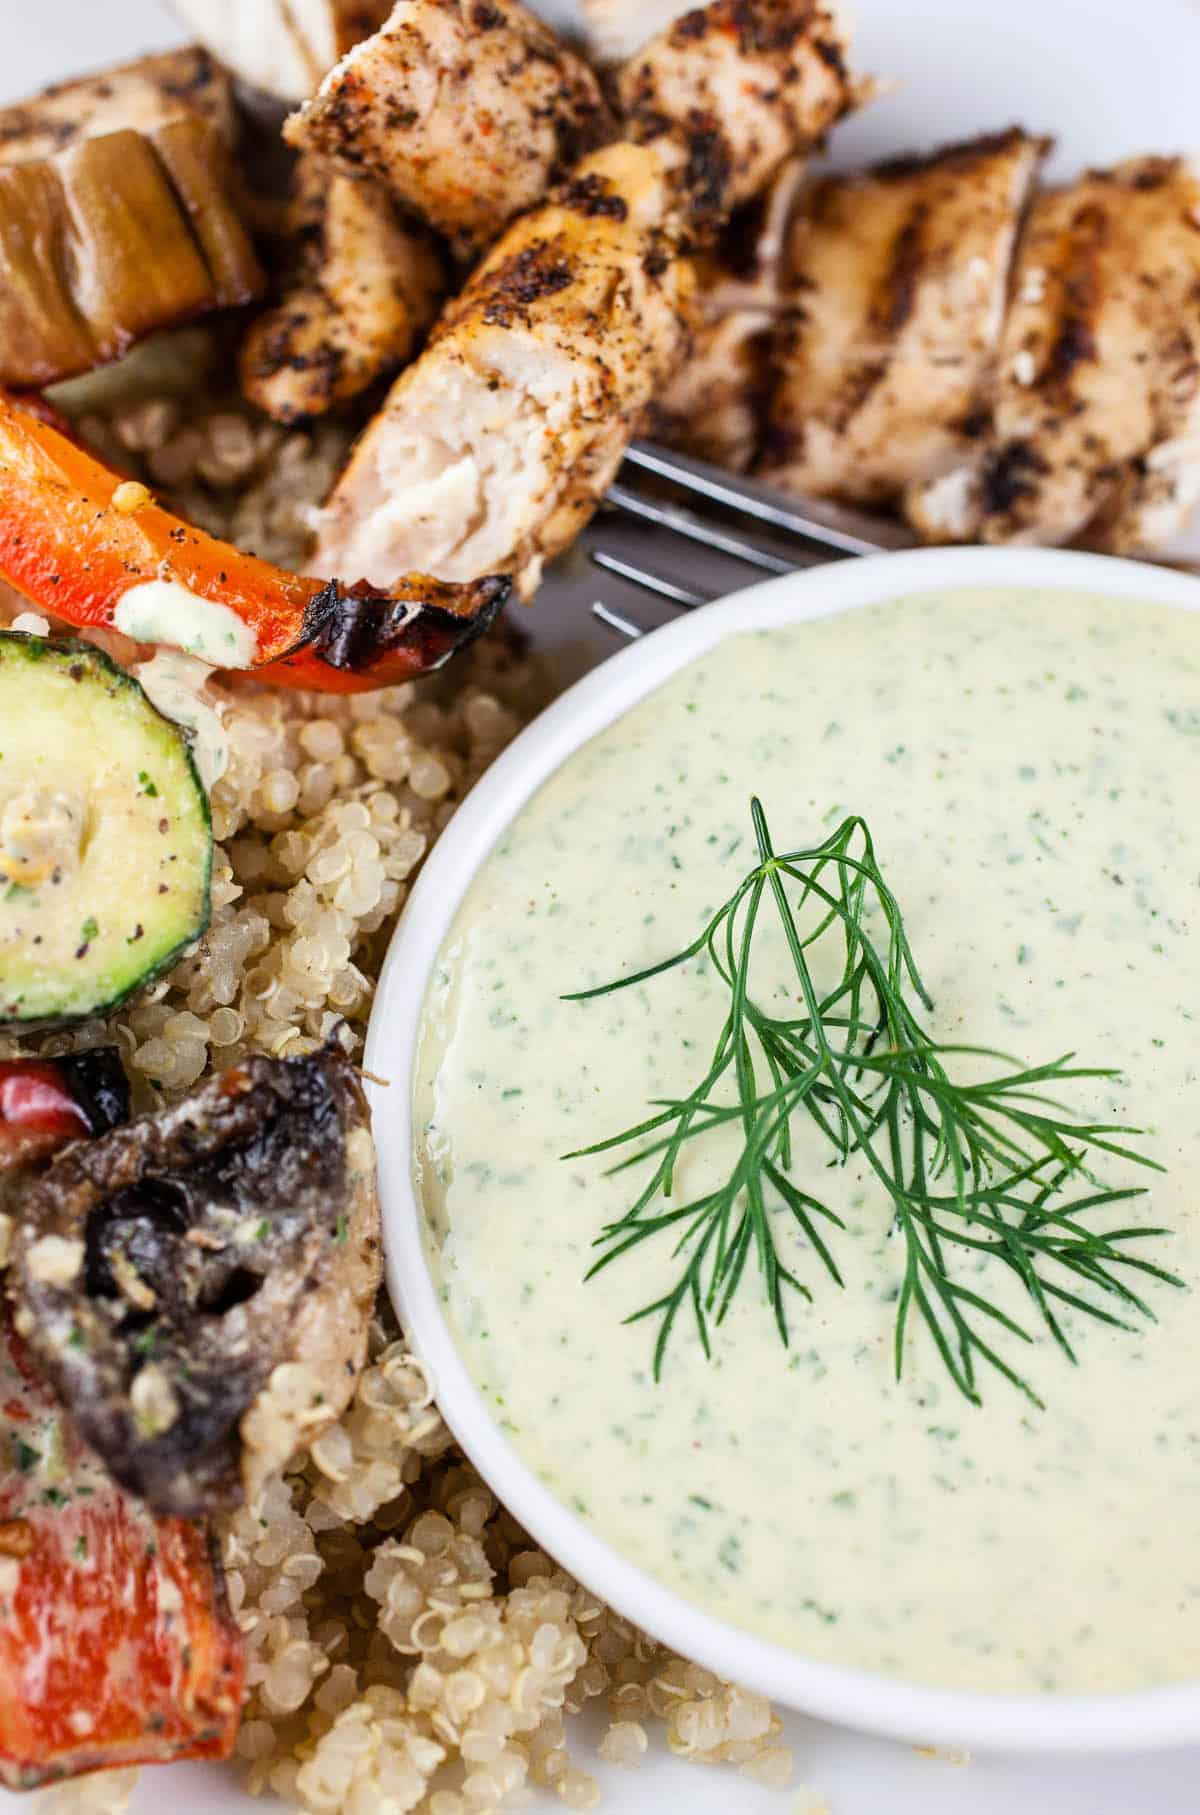 Lemon herb tahini sauce in small white bowl with grilled chicken and vegetables.